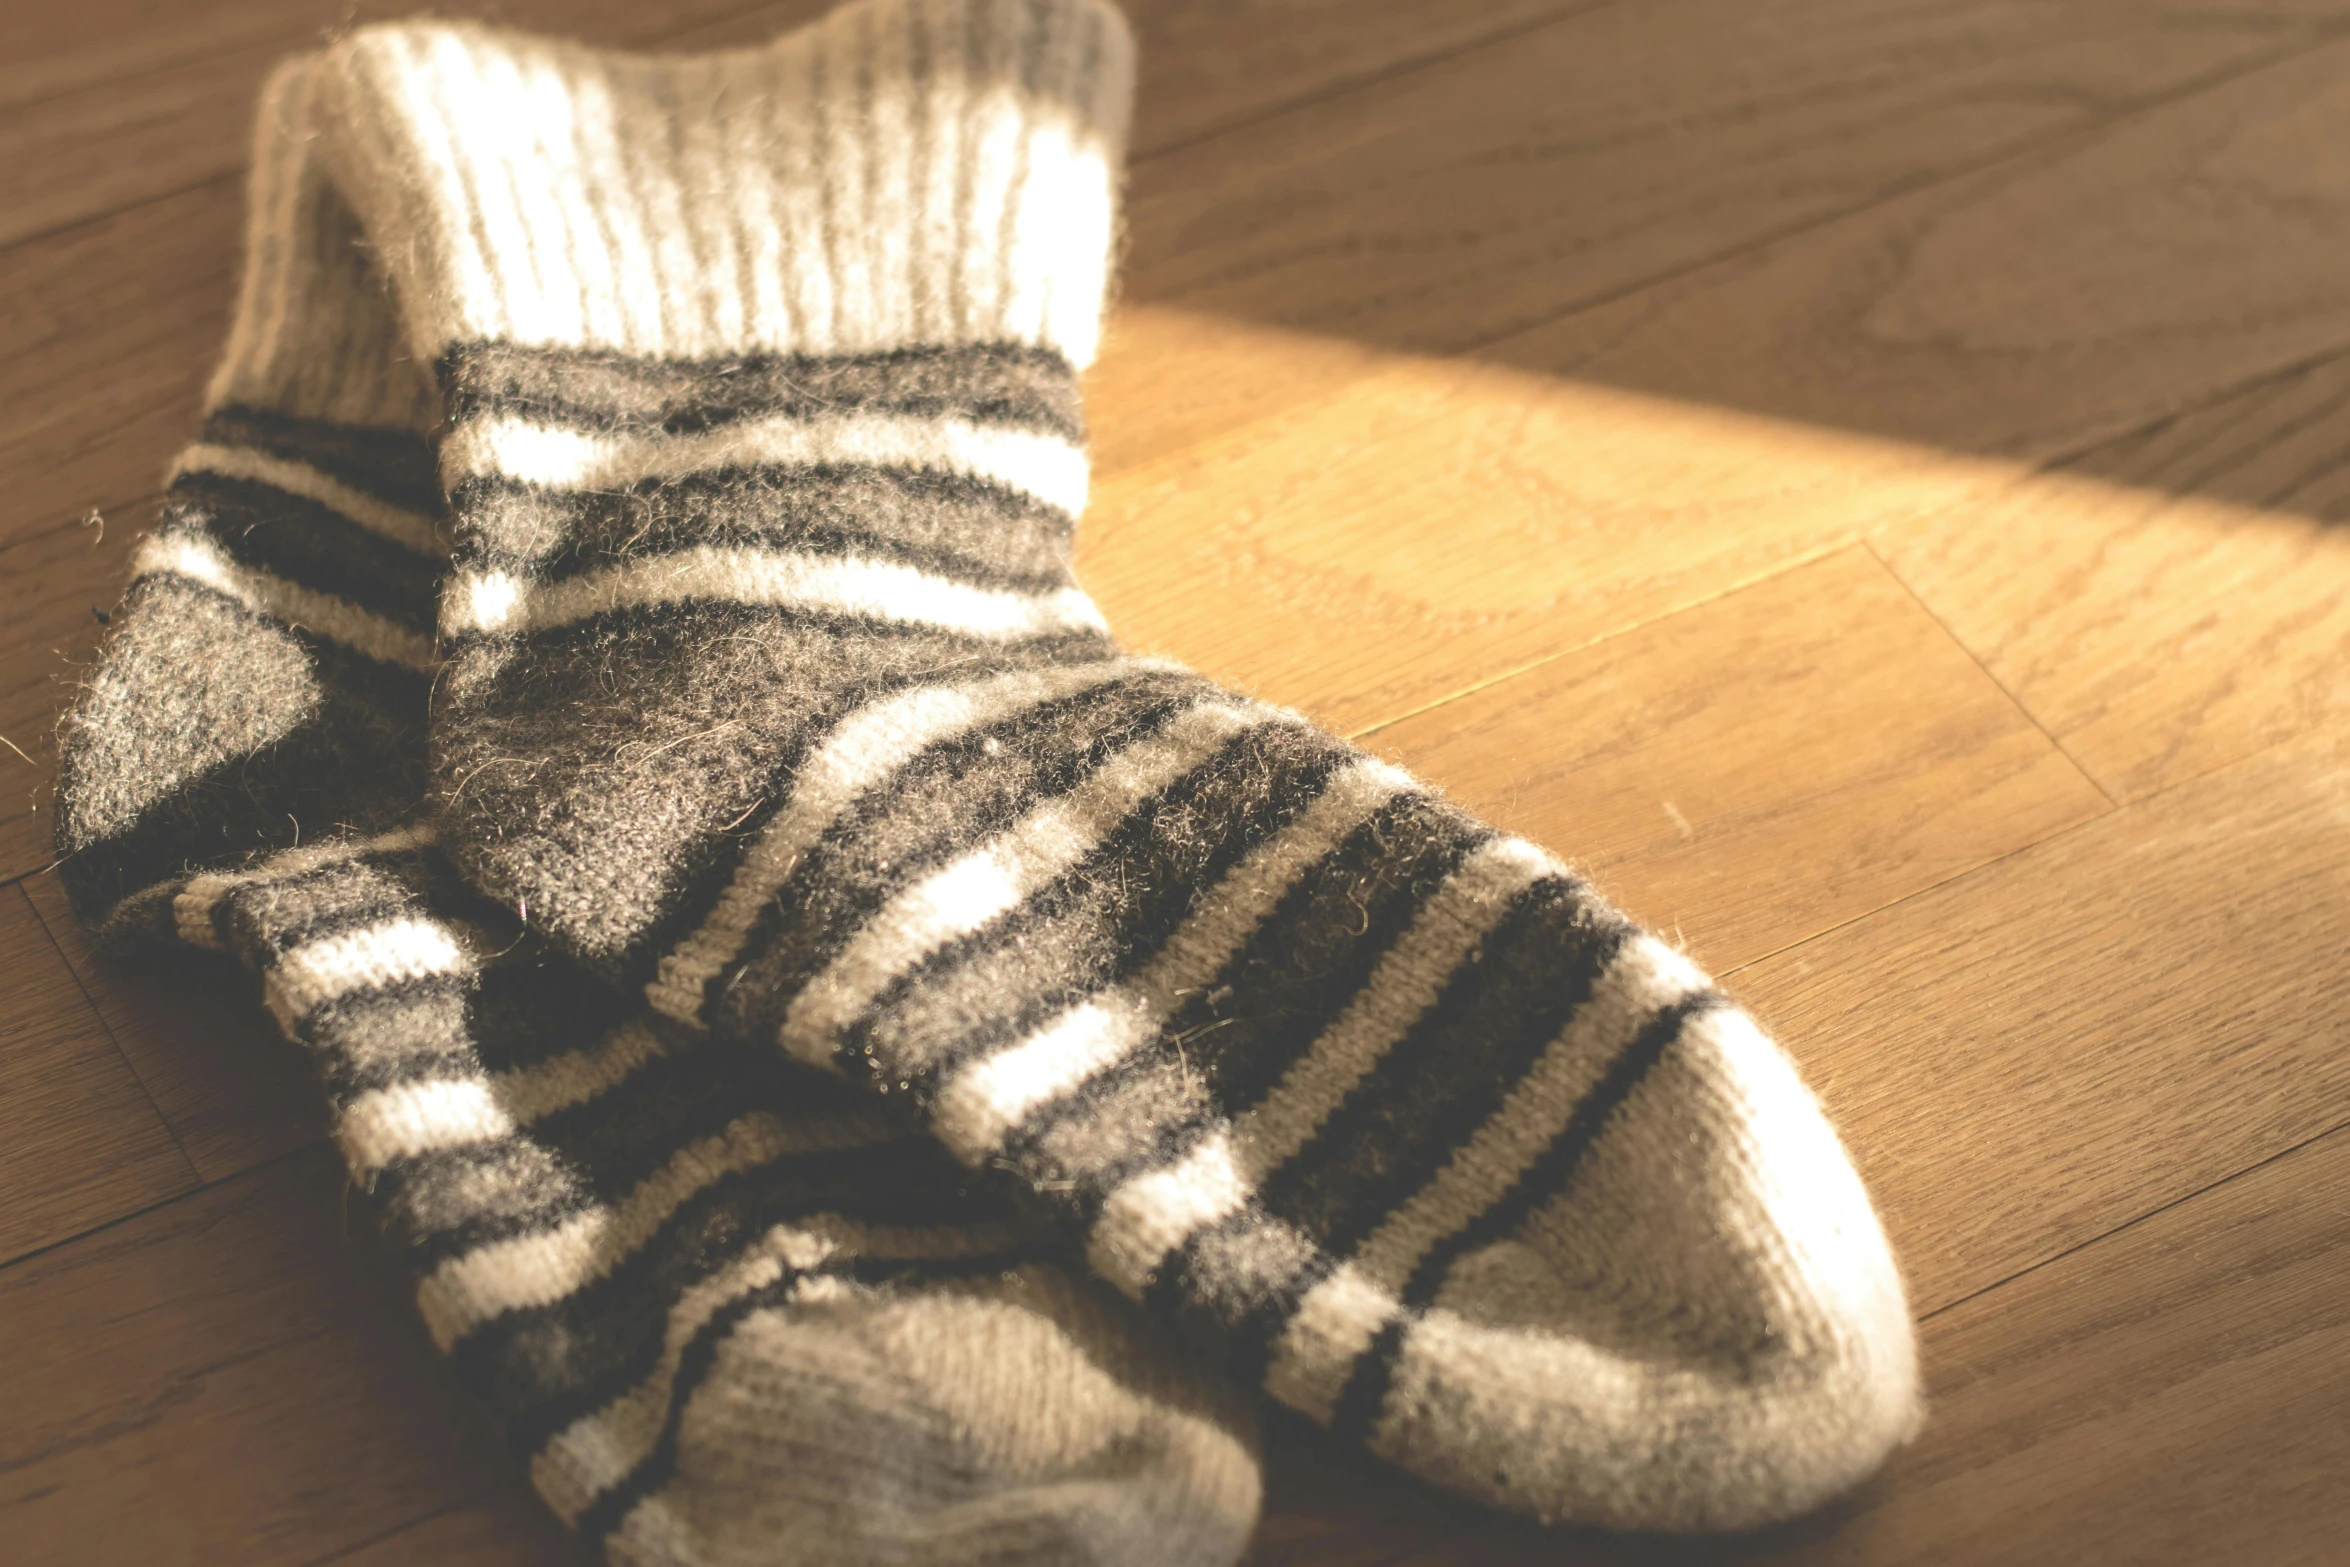 a pair of socks sitting on top of a wooden floor, unsplash, sepia sunshine, striped, soft and fluffy, warmly lit